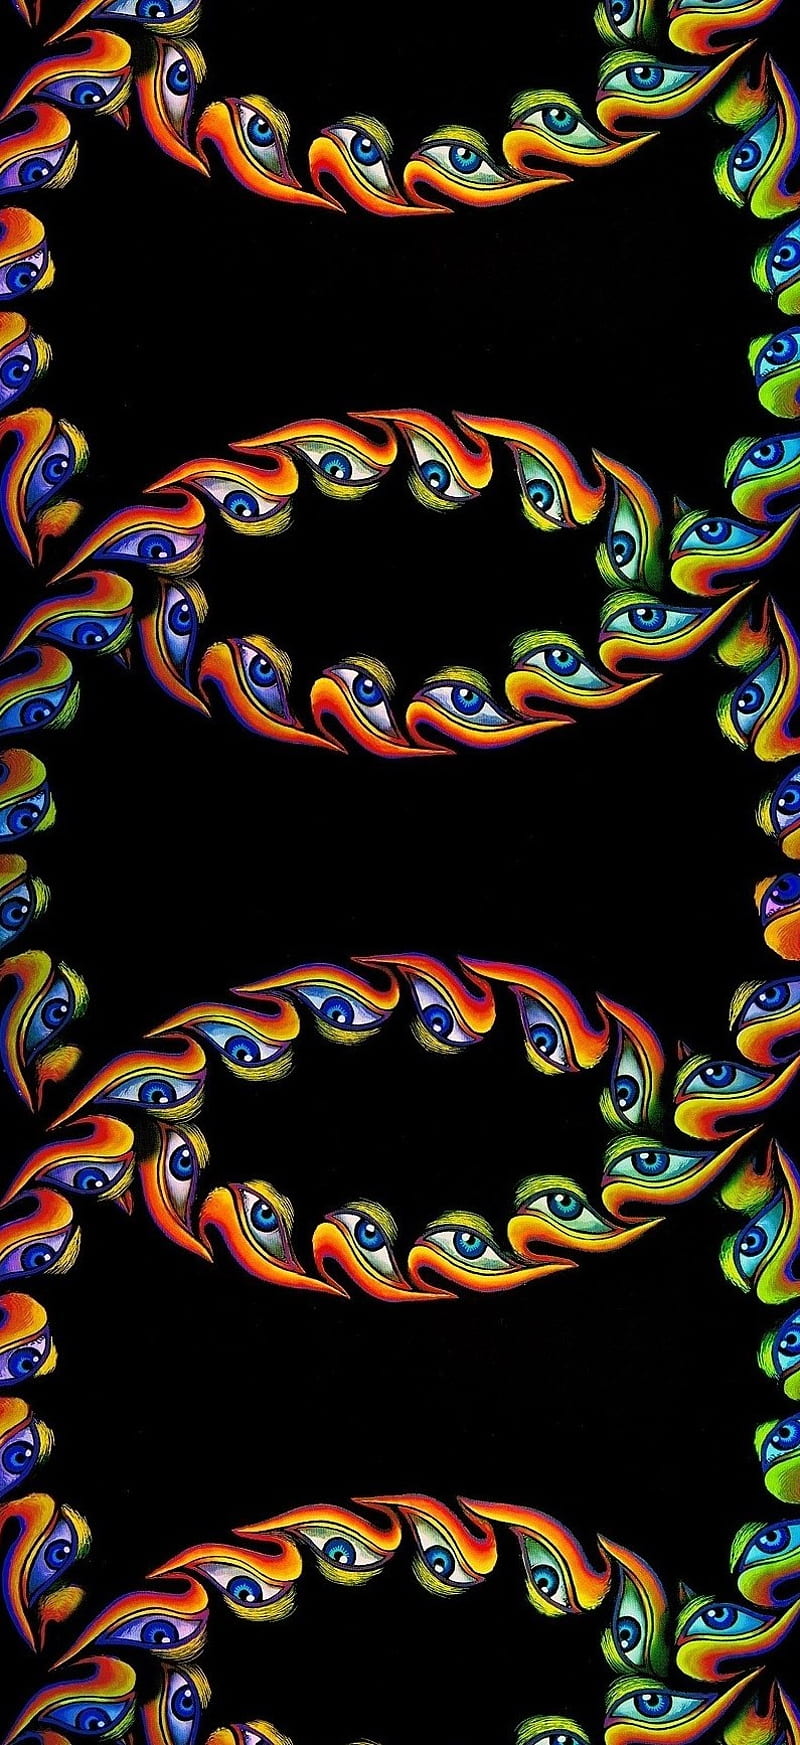 Tool-Lateralus, band, lateralus, metal, music, rainbow, rock, third eye, tool, trippy, HD phone wallpaper